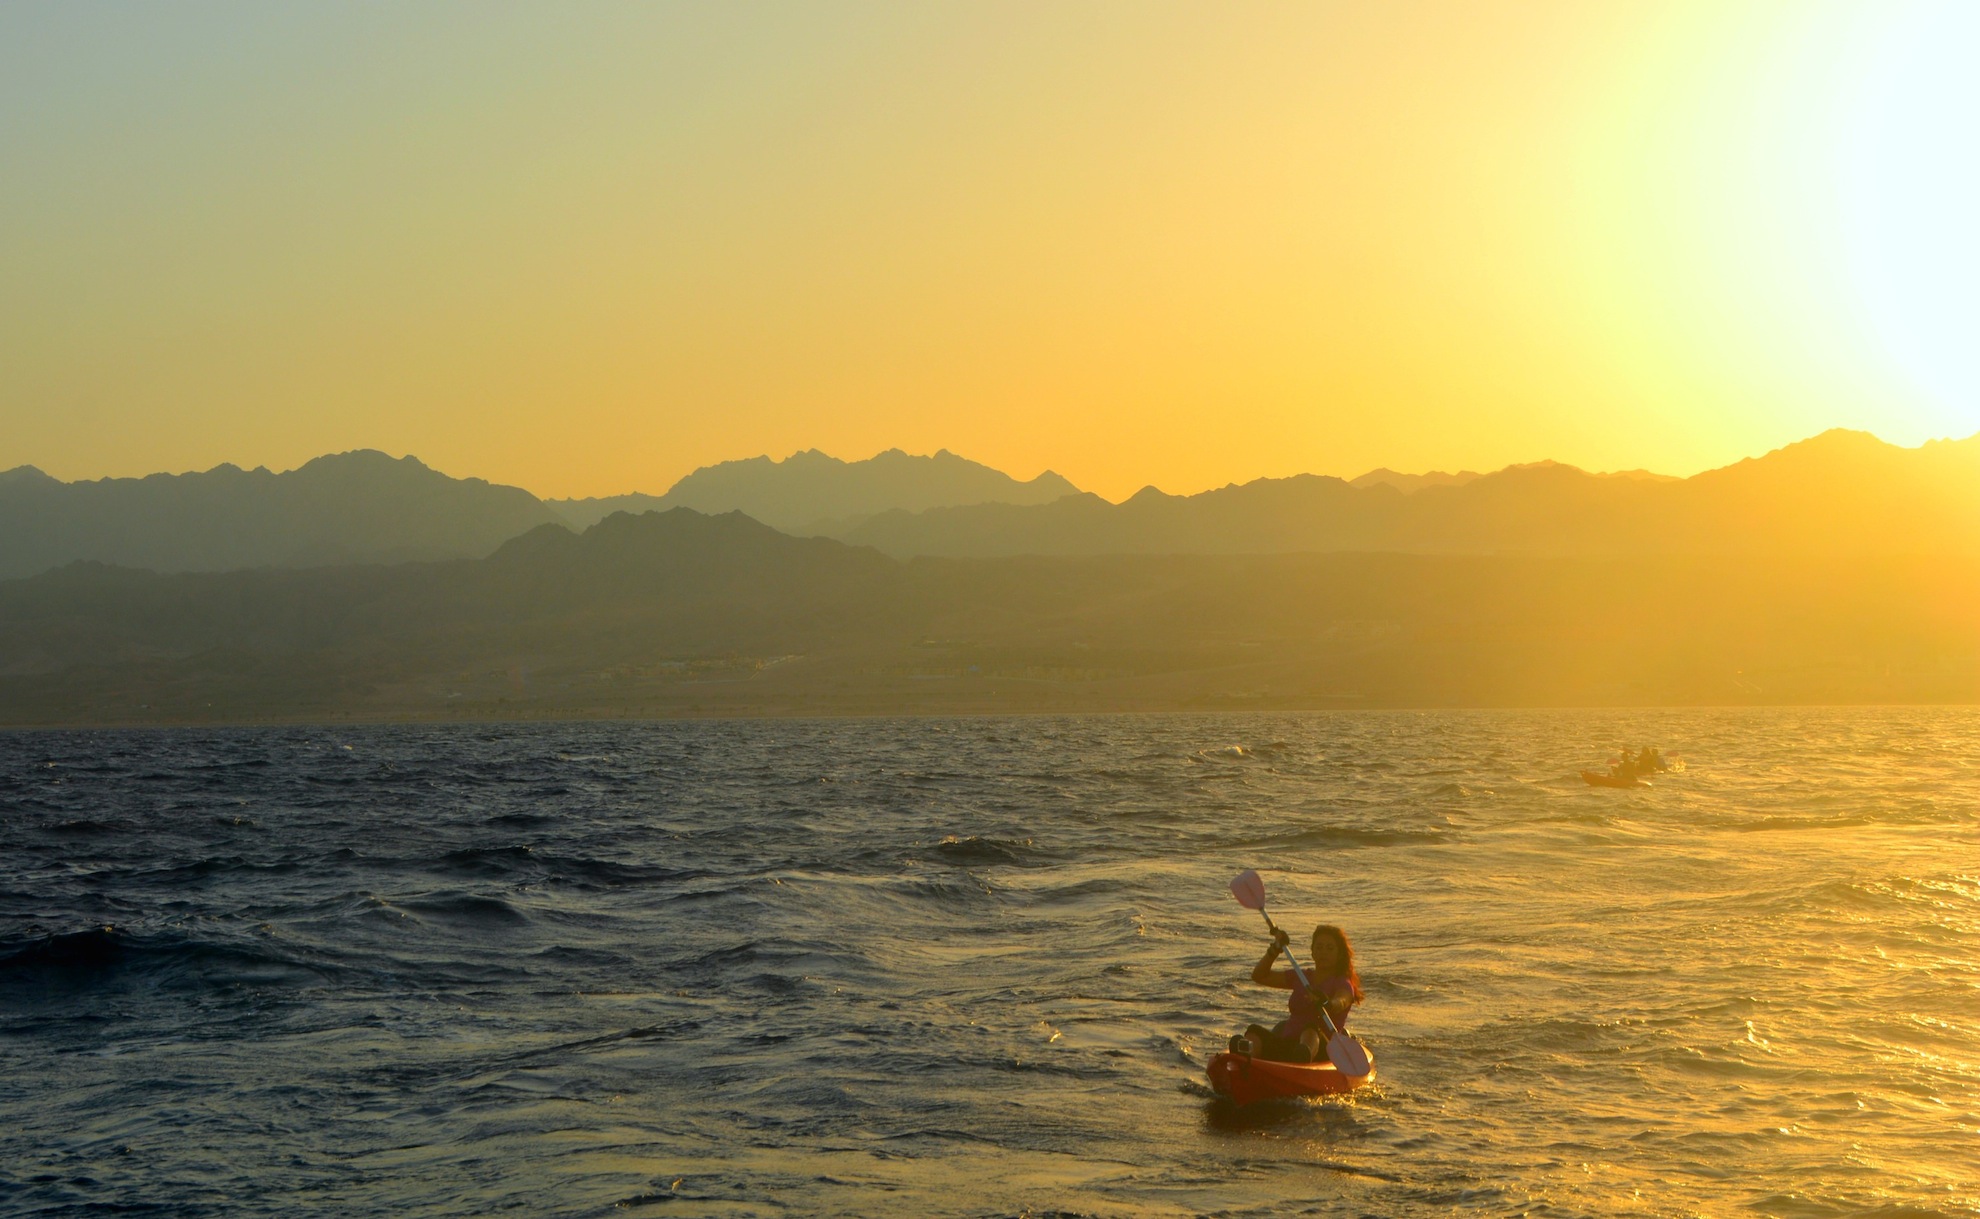 This Egyptian Woman Is Leading a Team of Kayakers across the Red Sea from Sinai to Jordan